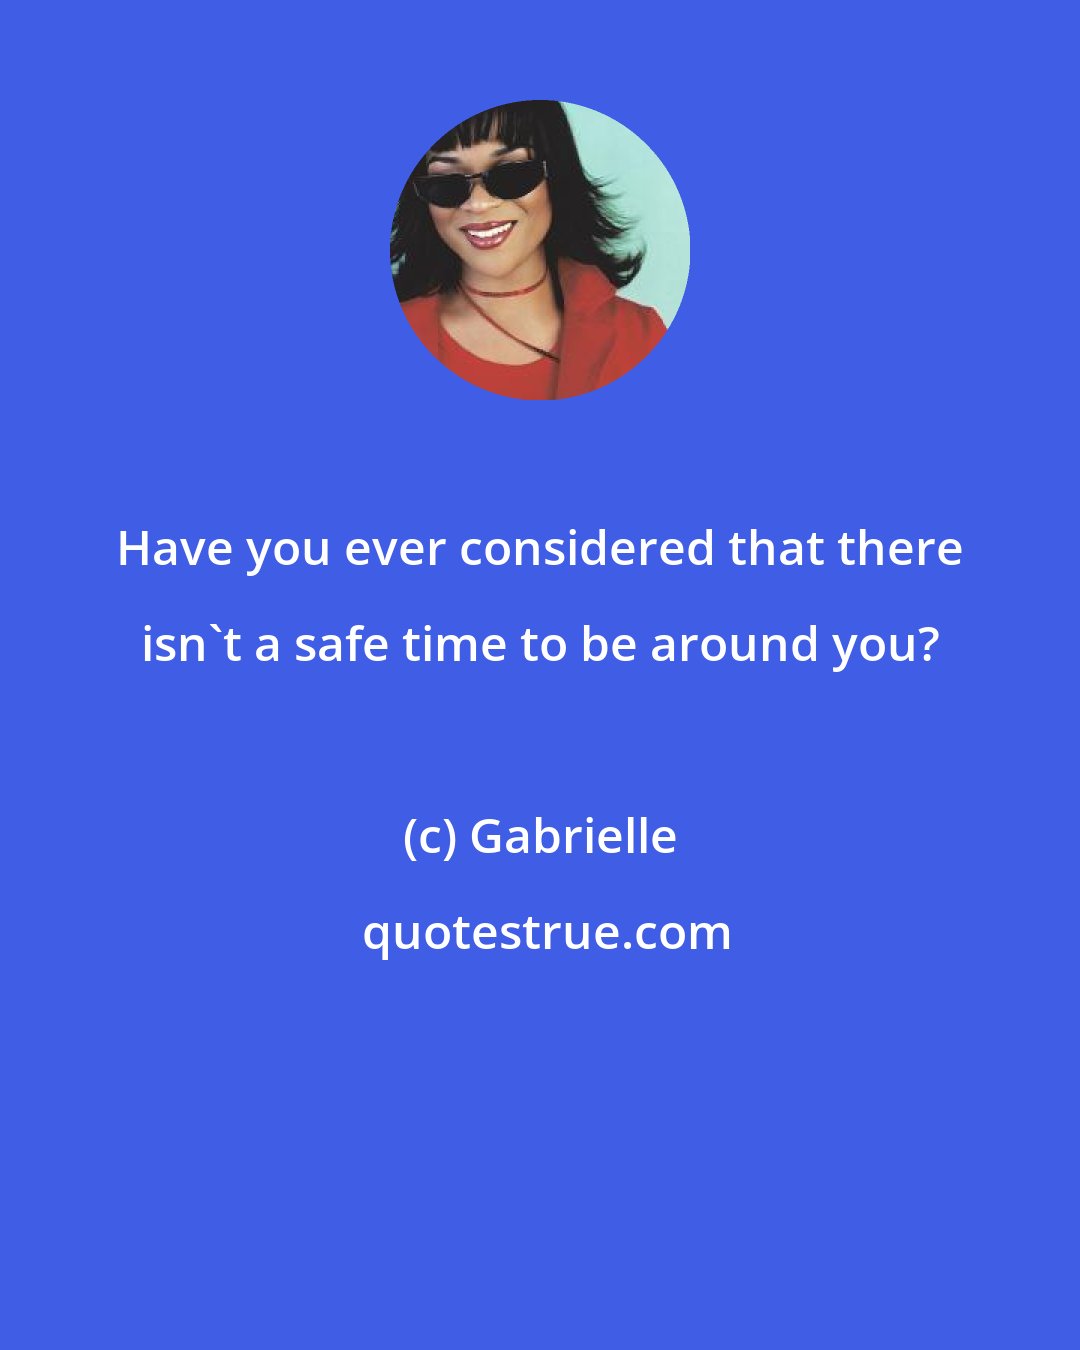 Gabrielle: Have you ever considered that there isn't a safe time to be around you?